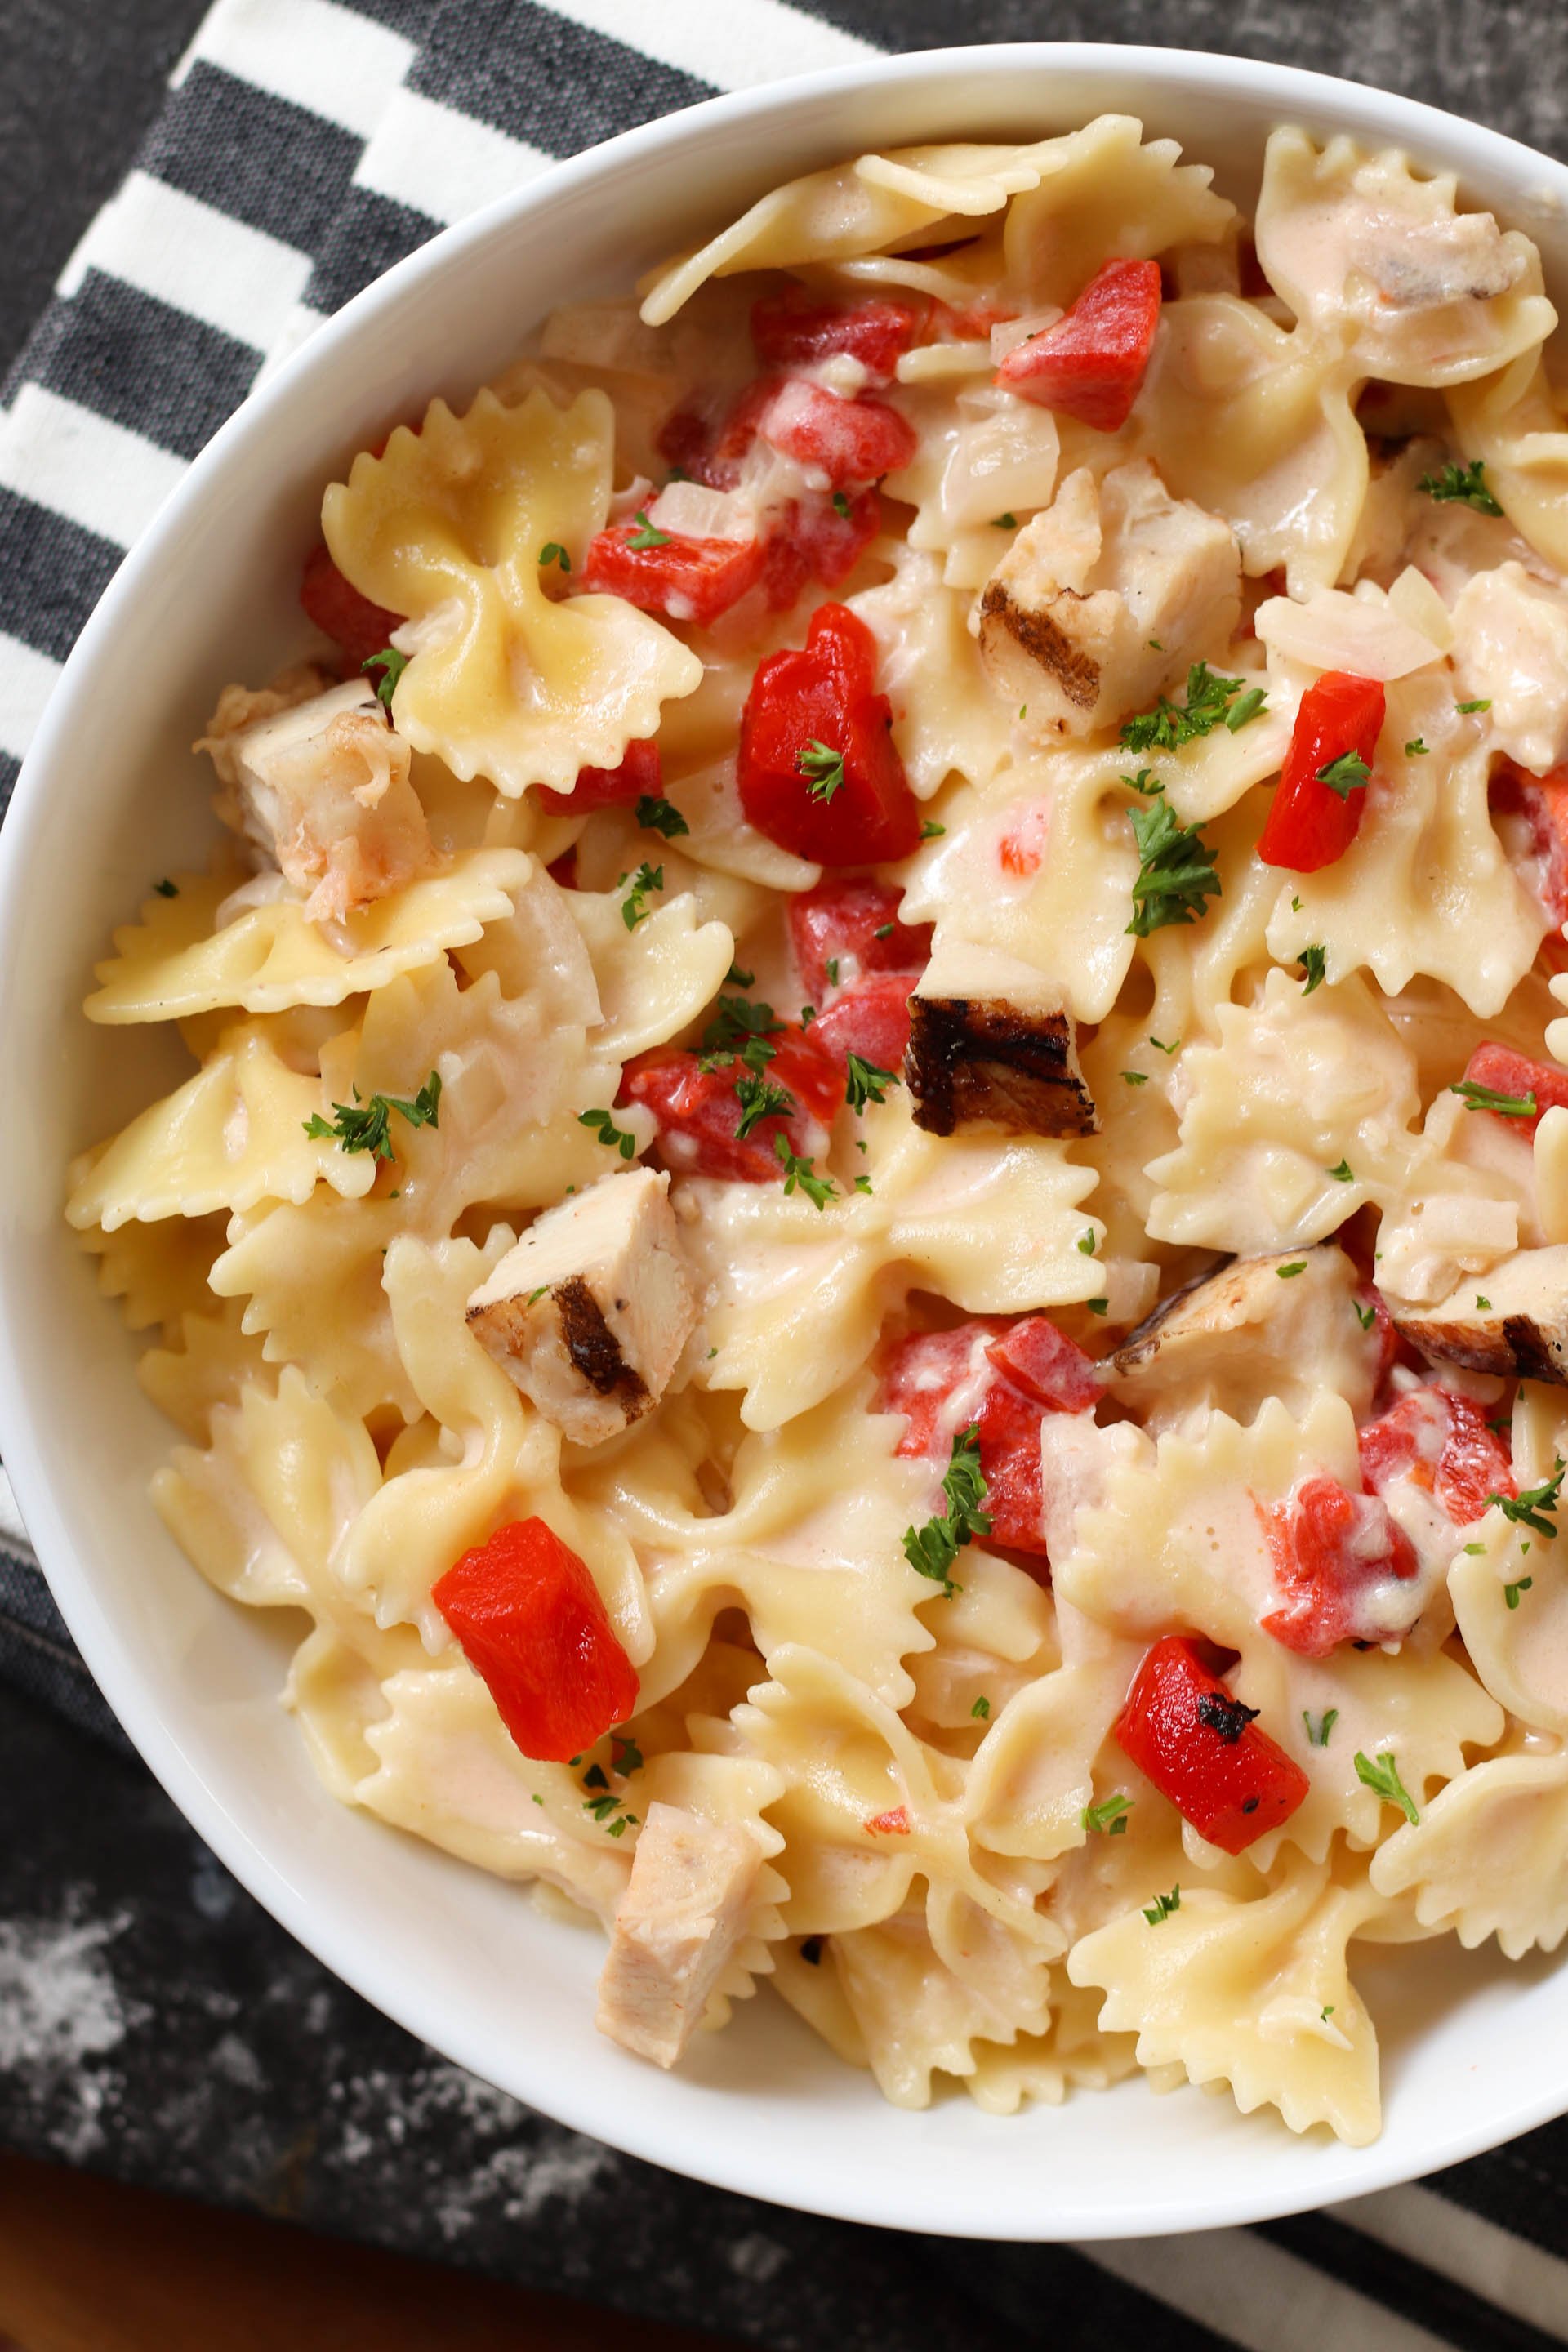 Creamy Chicken and Roasted Red Pepper Pasta Recipe